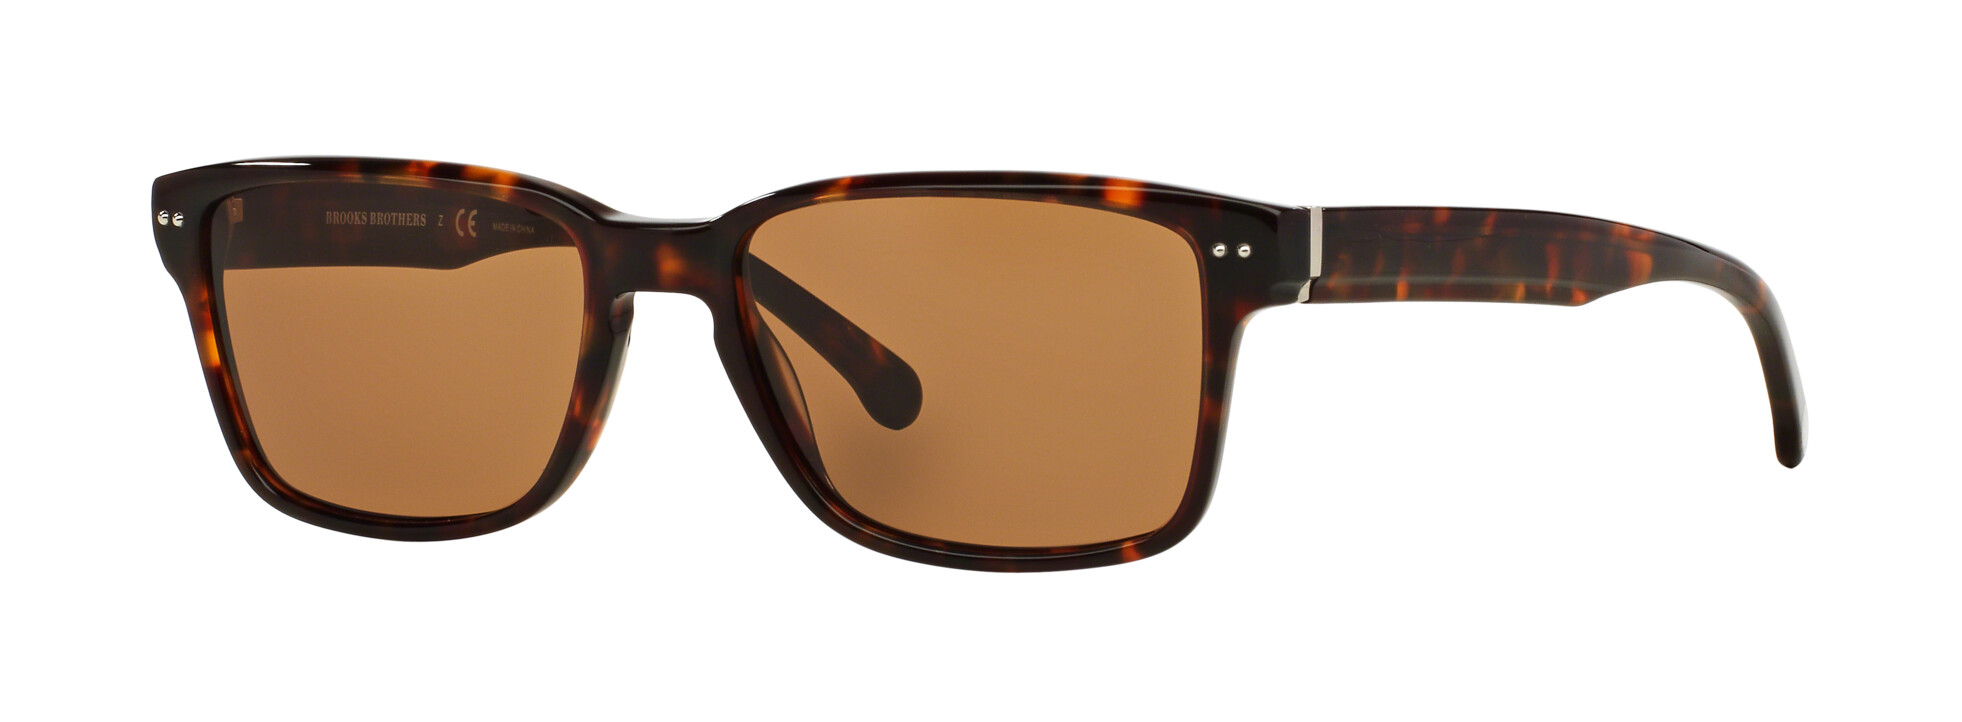 [products.image.angle_left01] Brooks Brothers 0BB 725S 501673 Sonnenbrille